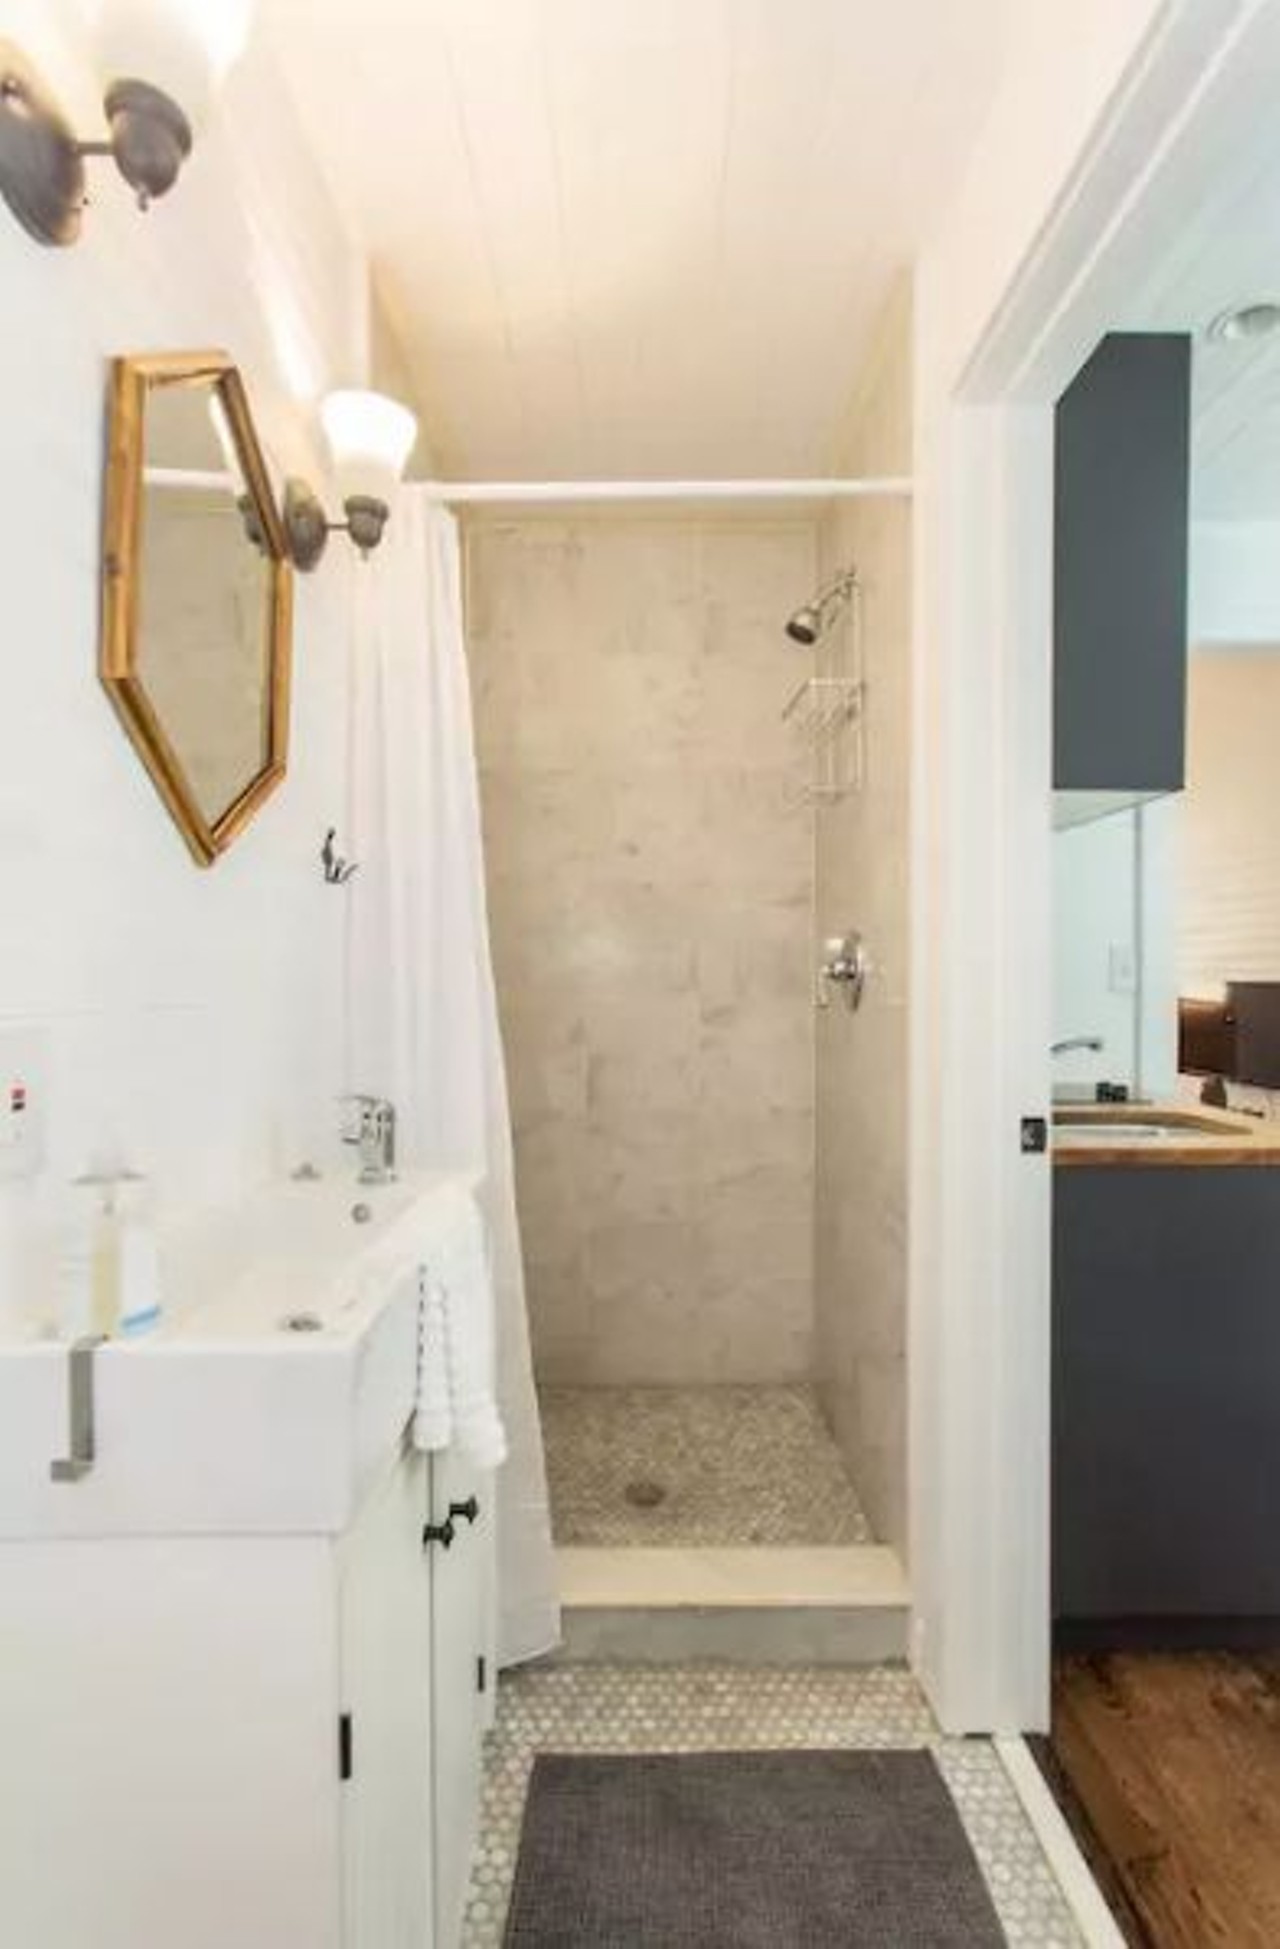 Tiny Cottage | Ybor City
$80/night
1 bed, 1 bath
The bathroom features a full-sized shower.